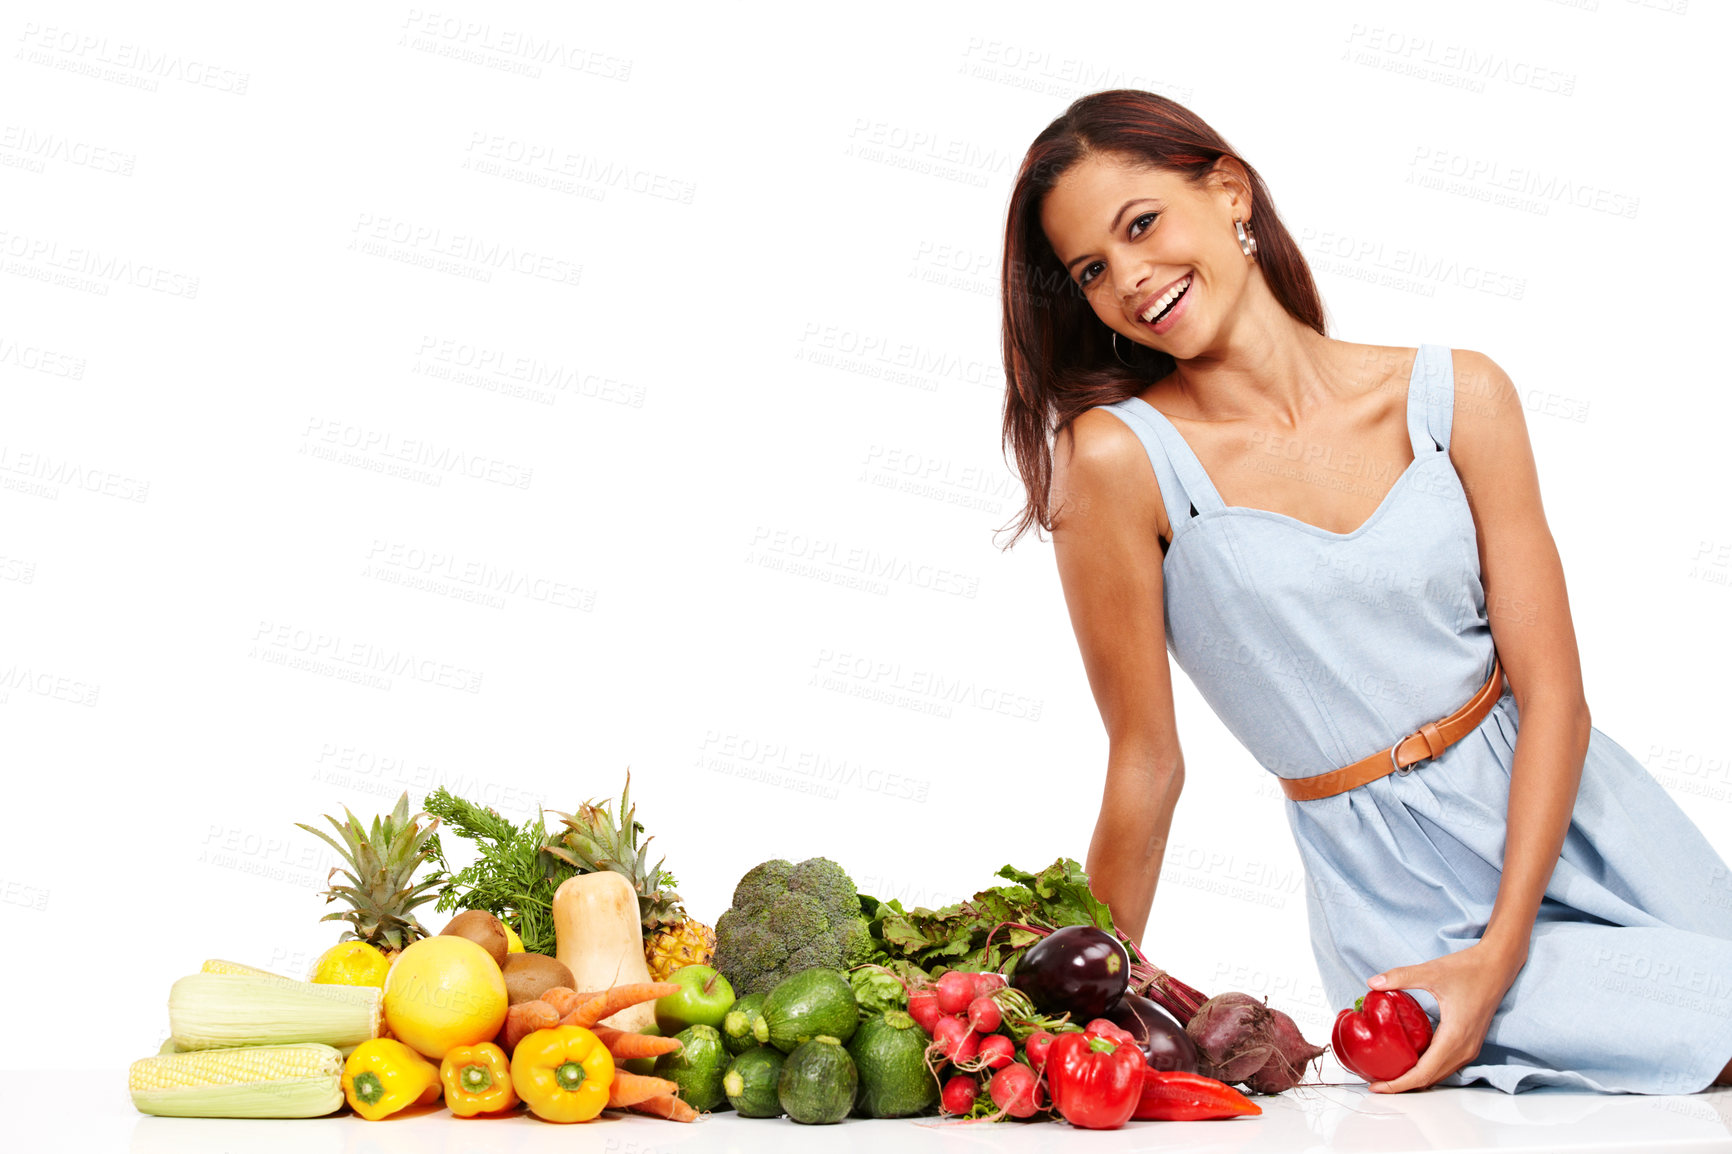 Buy stock photo Smiling young woman alongside an assortment of healthy and fresh vegetables